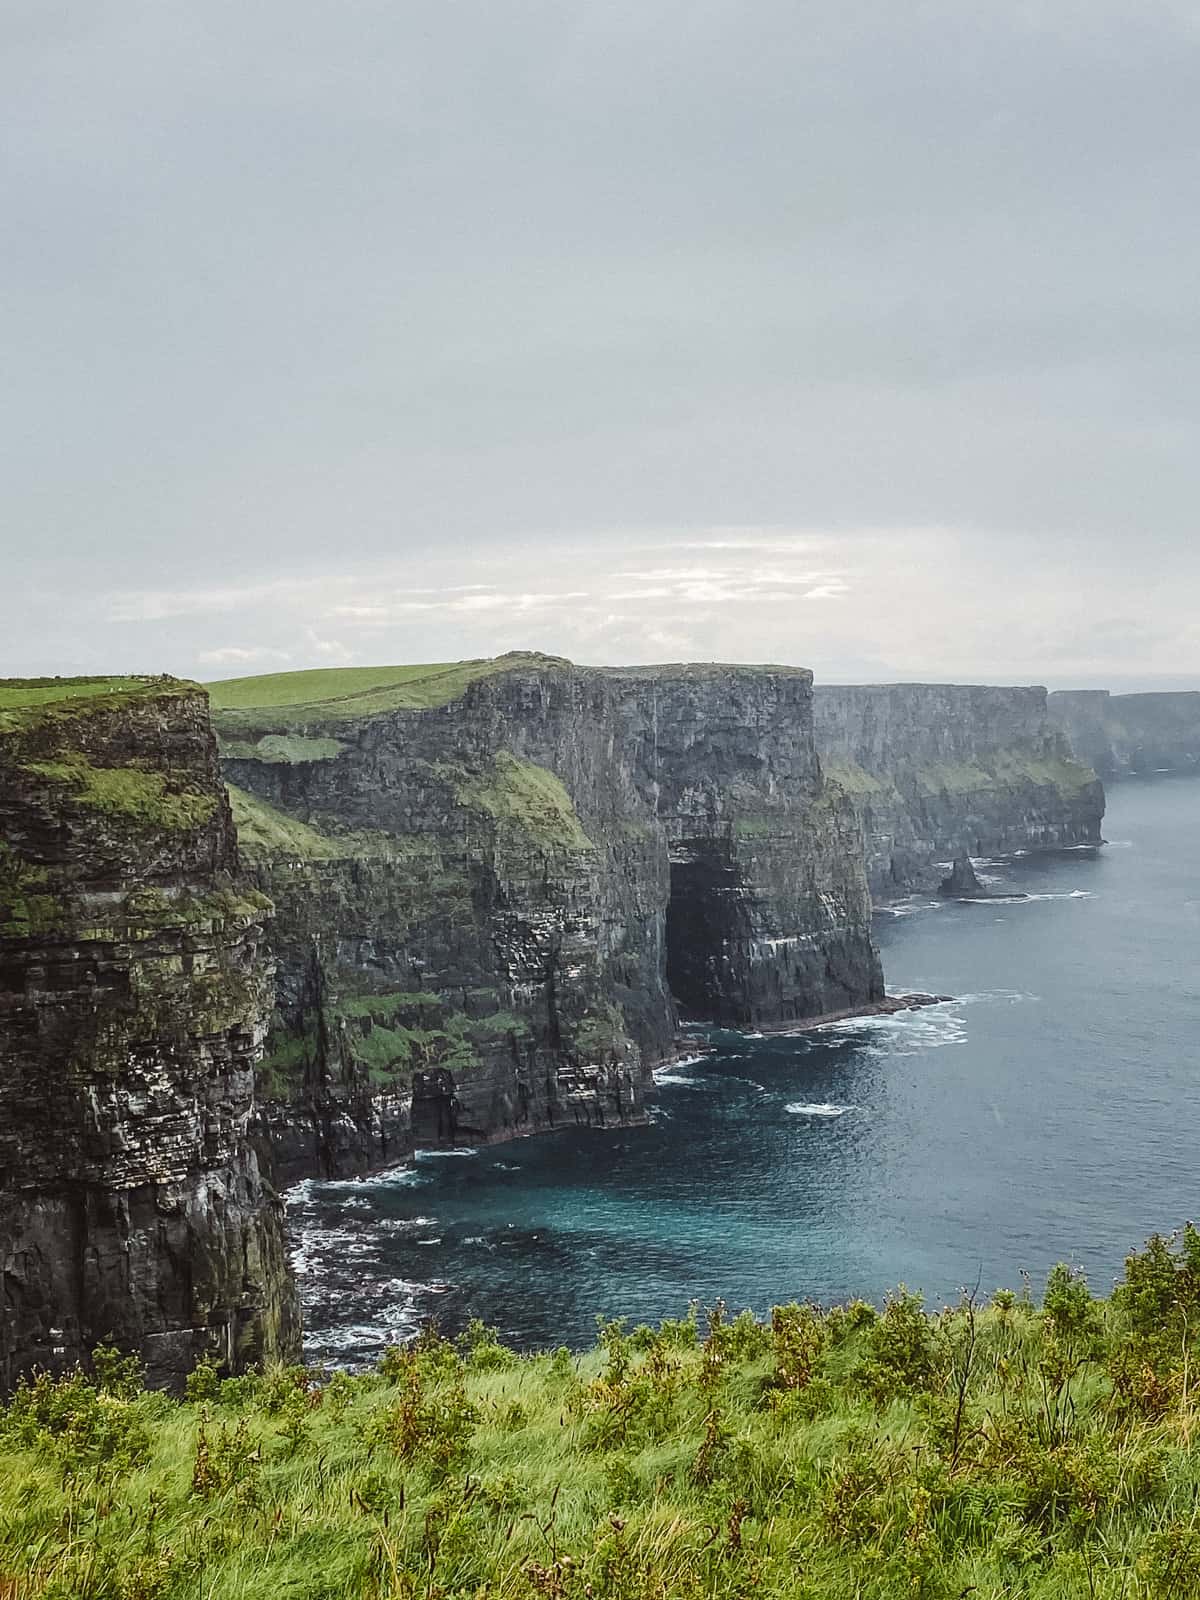 The lush green landscape of Ireland's Cliffs of Moher, with the sea cliffs dropping dramatically into the Atlantic Ocean, under a moody sky that highlights the natural beauty and ruggedness of the Irish coastline.